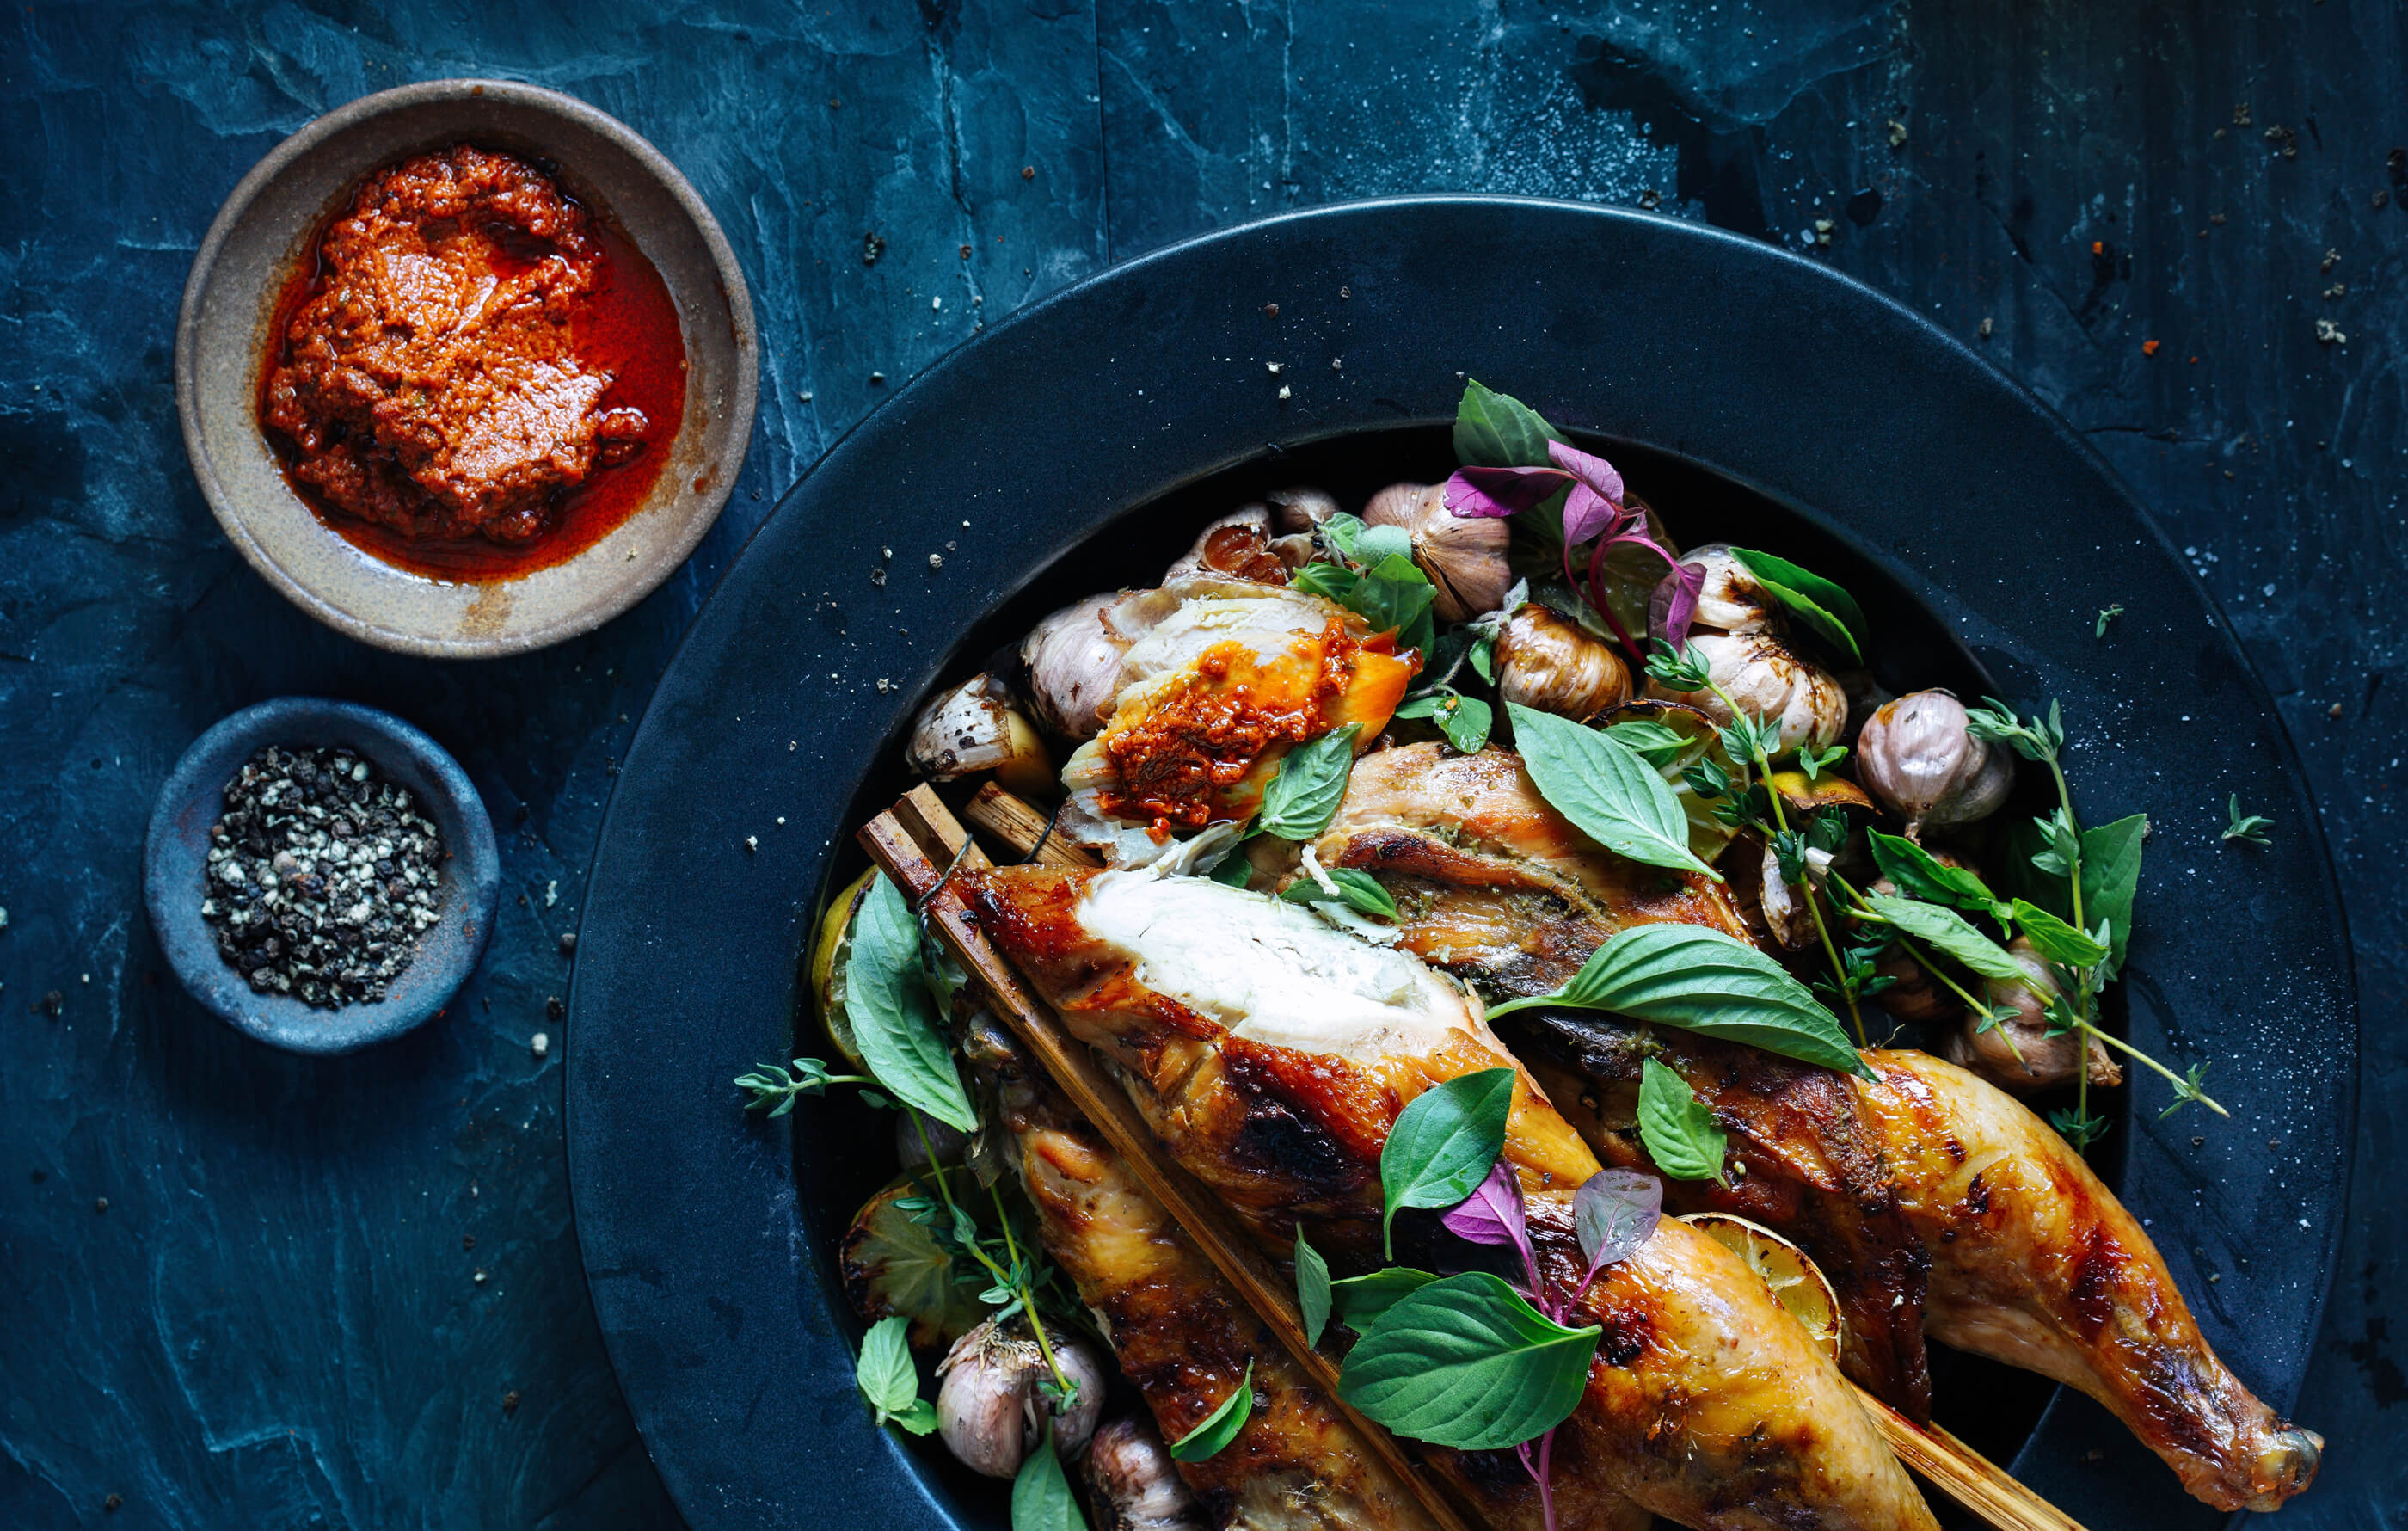 Full spread image of roasted chicken in a dark blue bowl, with roasted garlic, rosemary and a sprinkle of fresh herbs